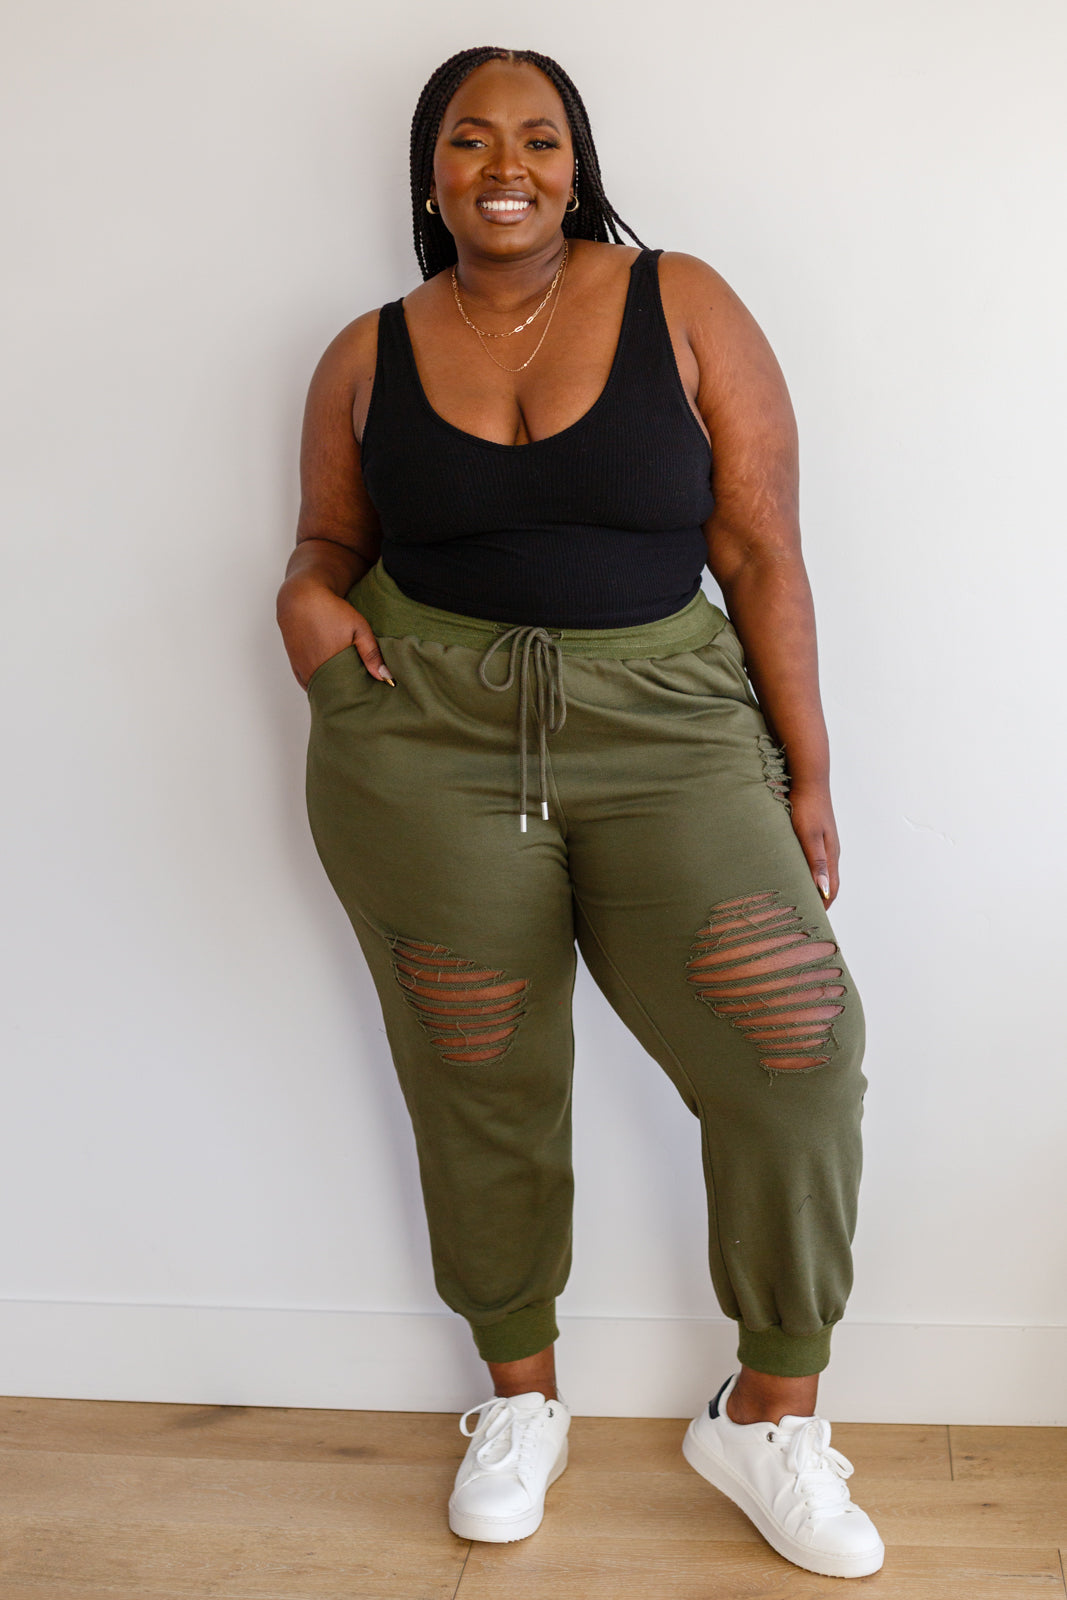 RESTOCK! Outfit Repeat Elastic Waist Joggers- Olive